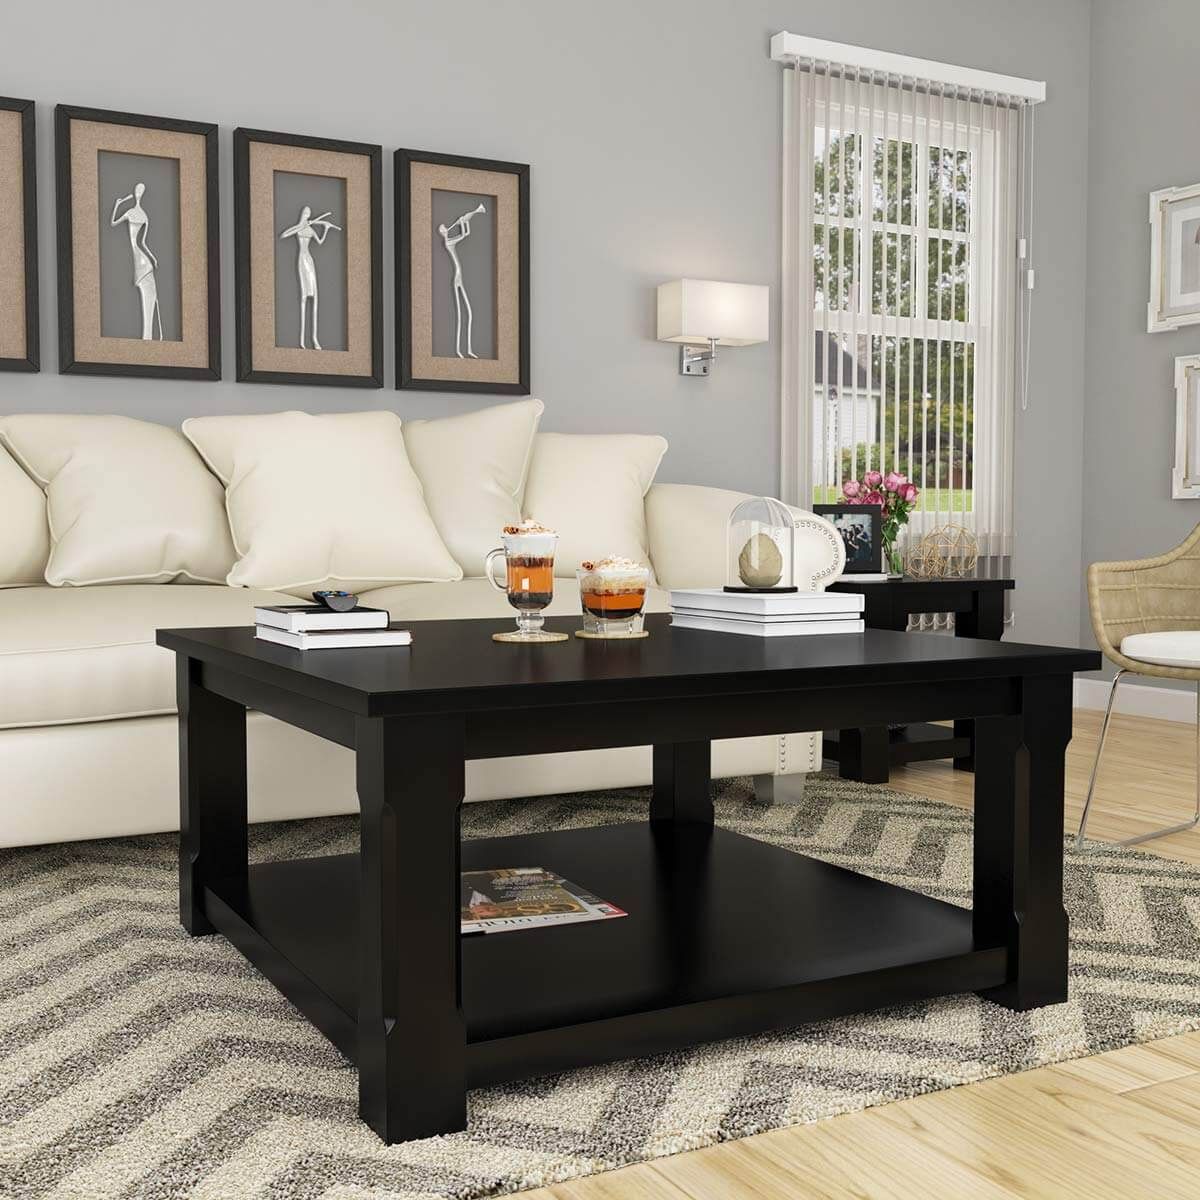 Brimson Solid Wood 2 Tier Black Square Coffee Table. Regarding Transitional Square Coffee Tables (Photo 8 of 15)